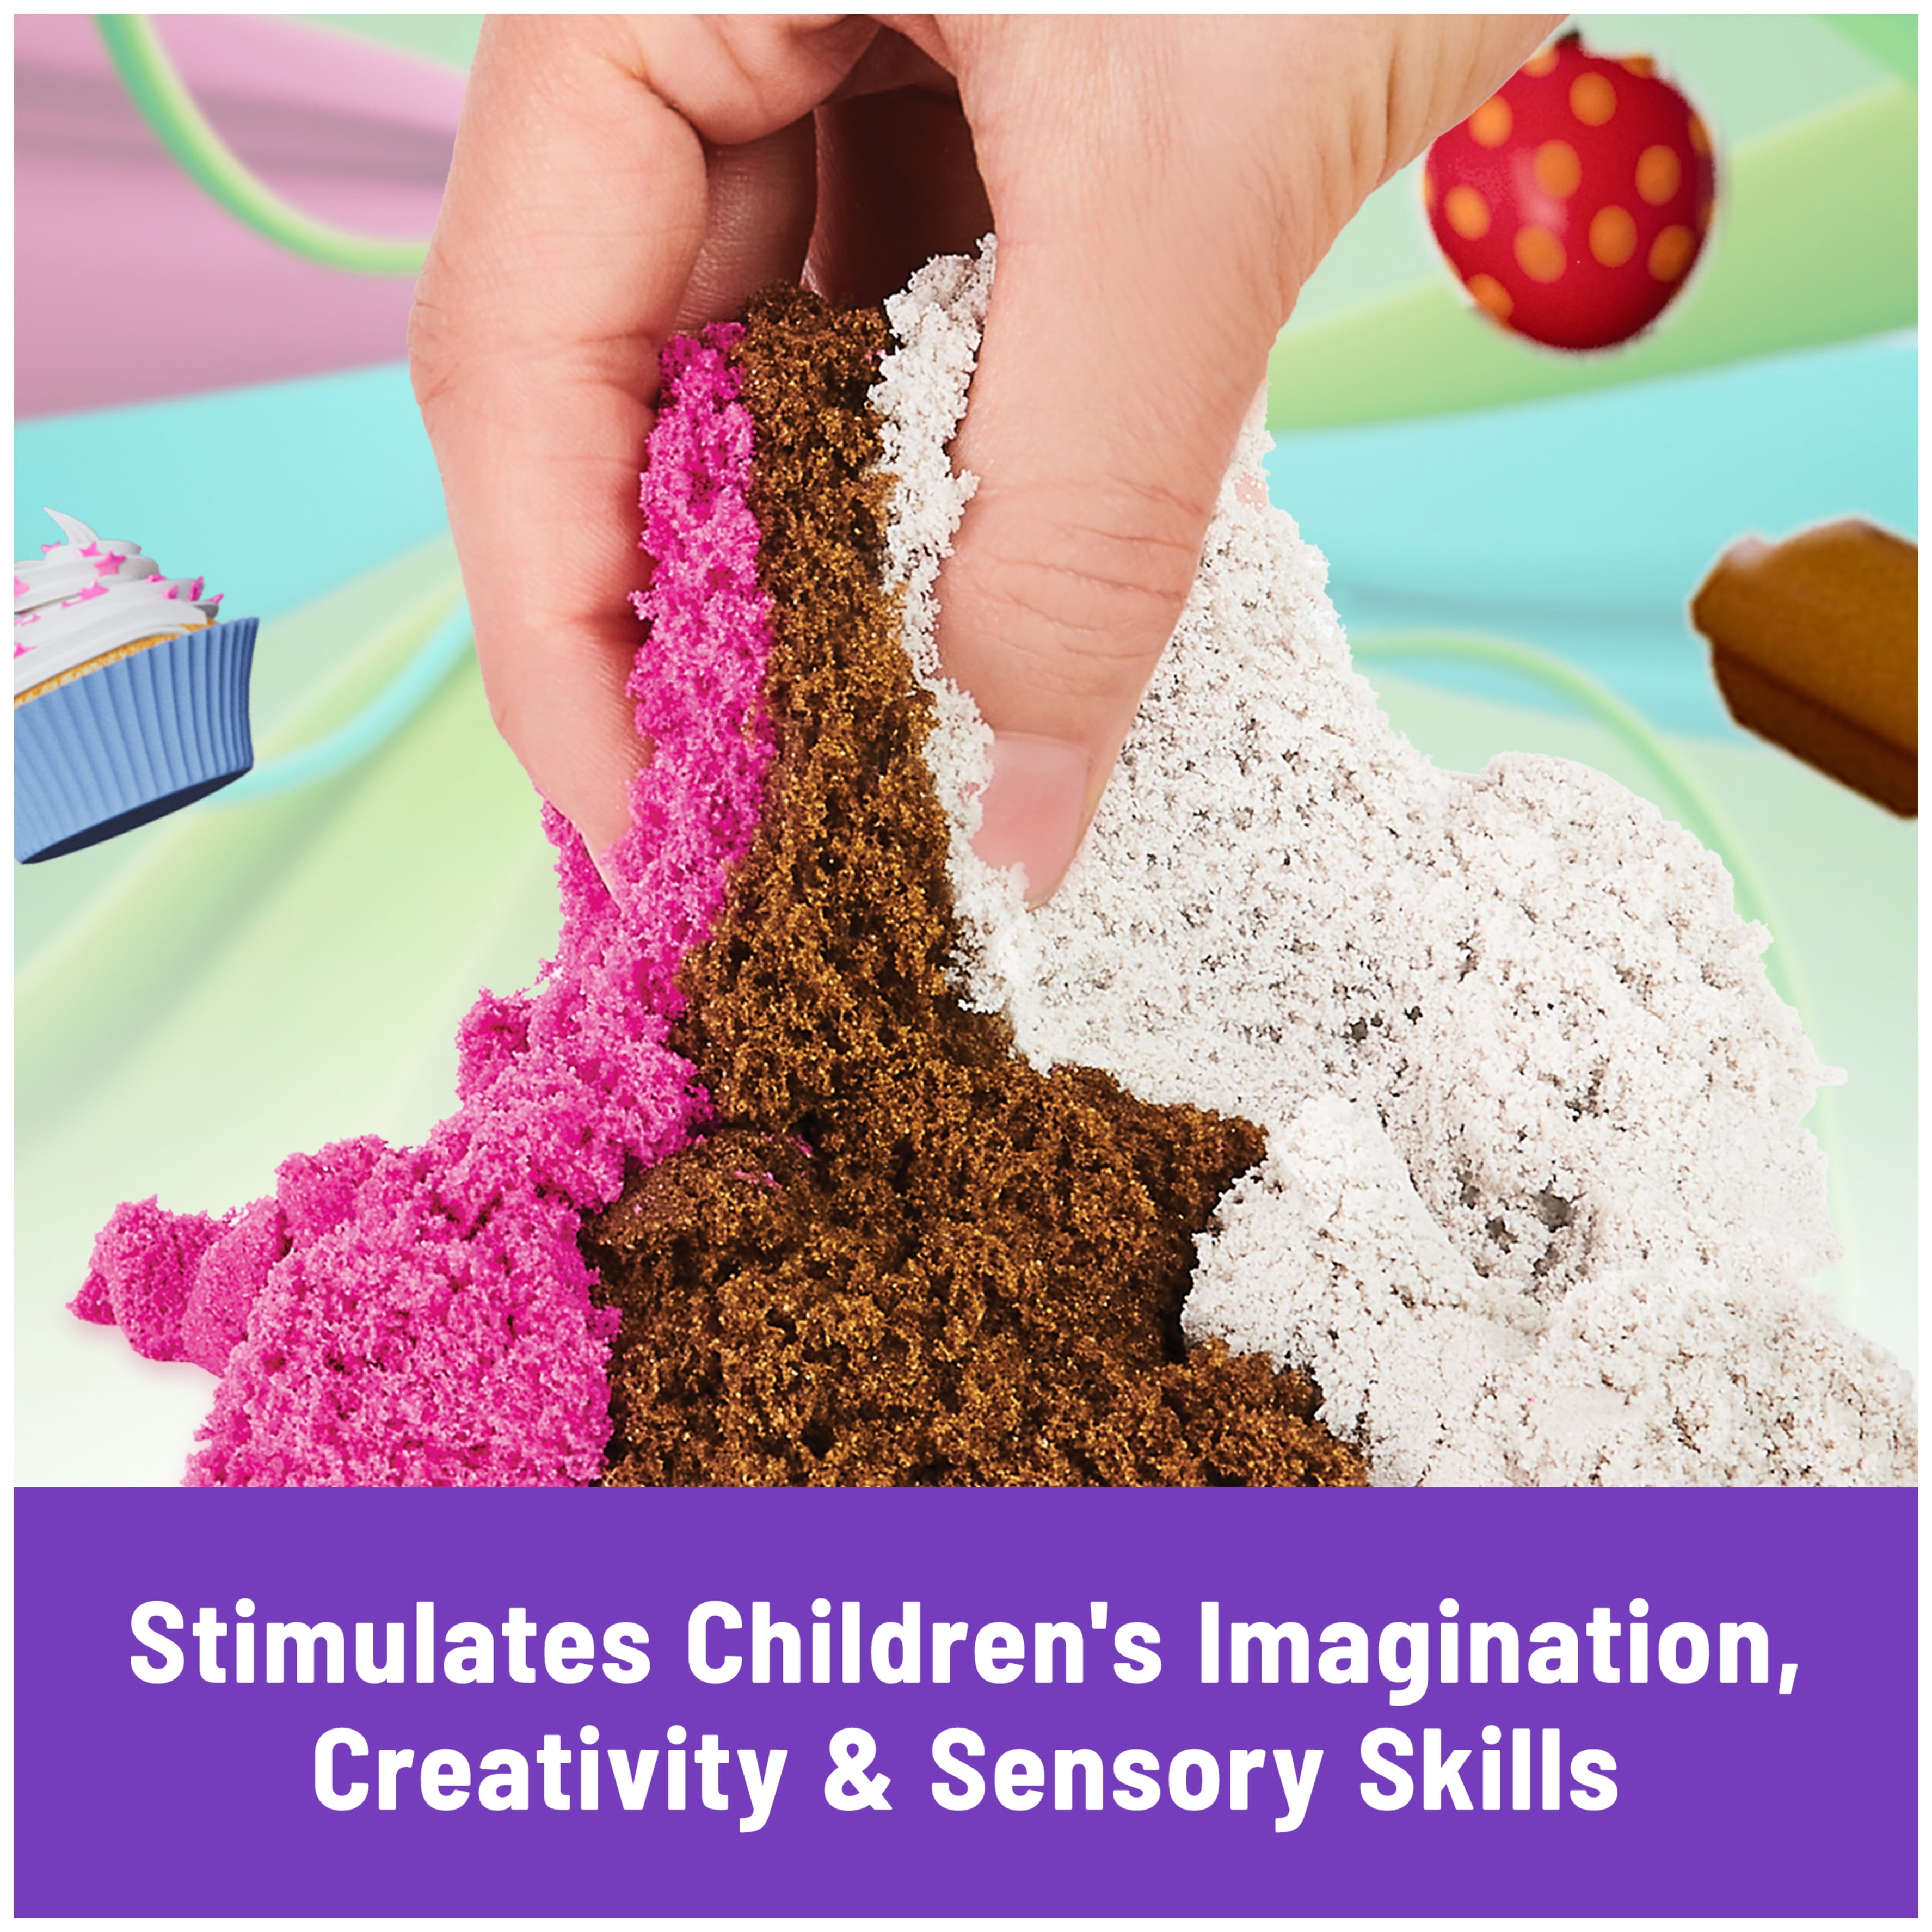 35 Awesome Kinetic Sand Activities for Kids - The Sensory Spectrum